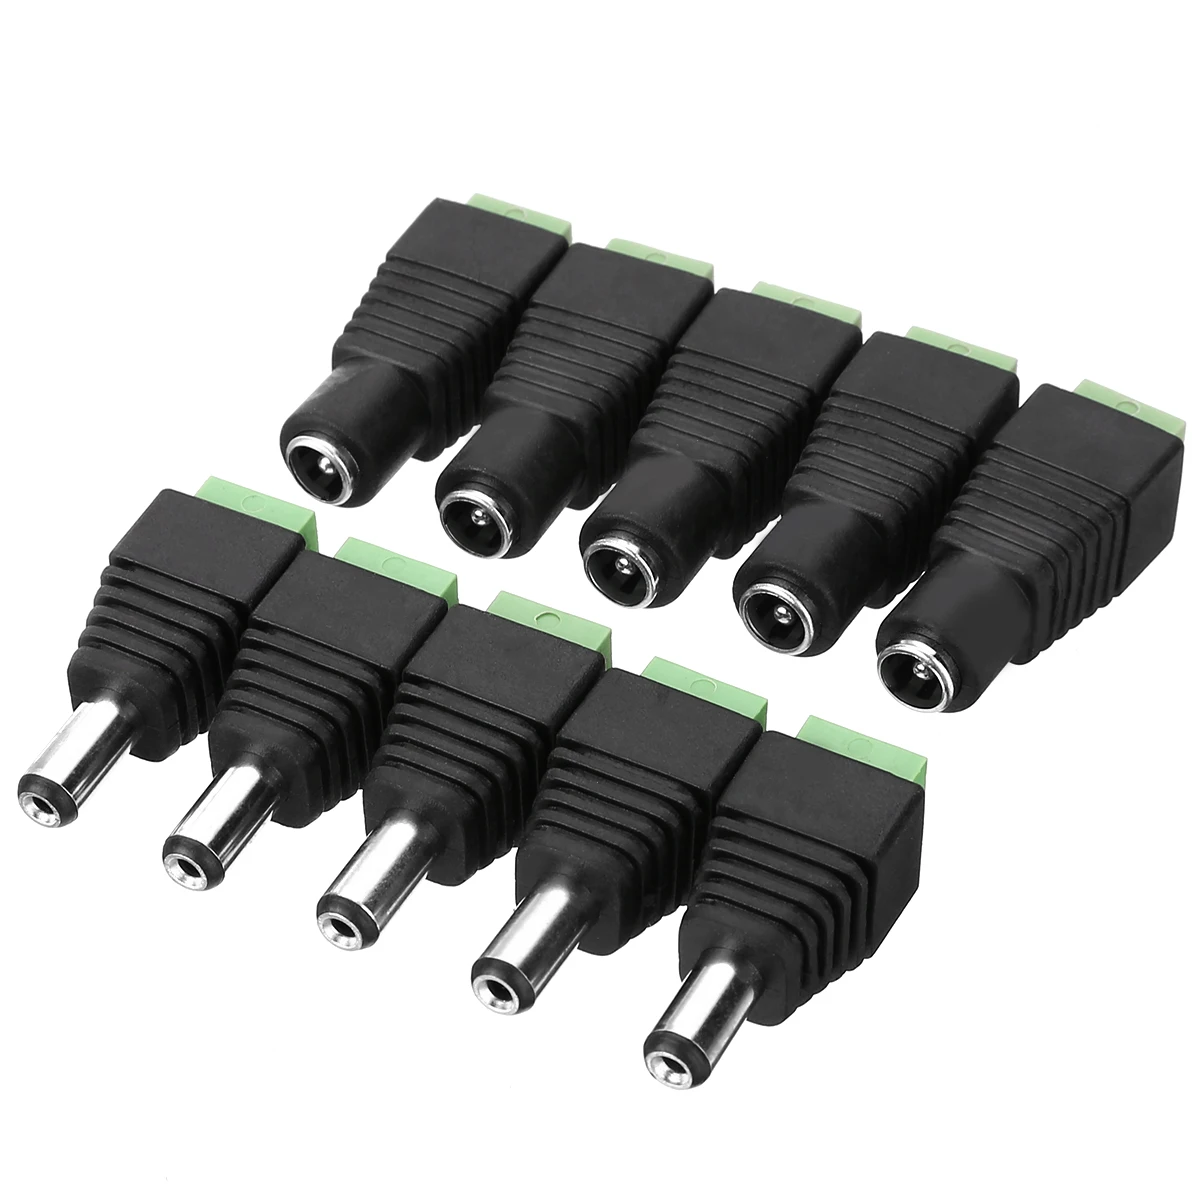 SET of MALE & FEMALE 2.5MM X 5.5MM DC POWER CONNECTORS for CCTV/REPAIRS 